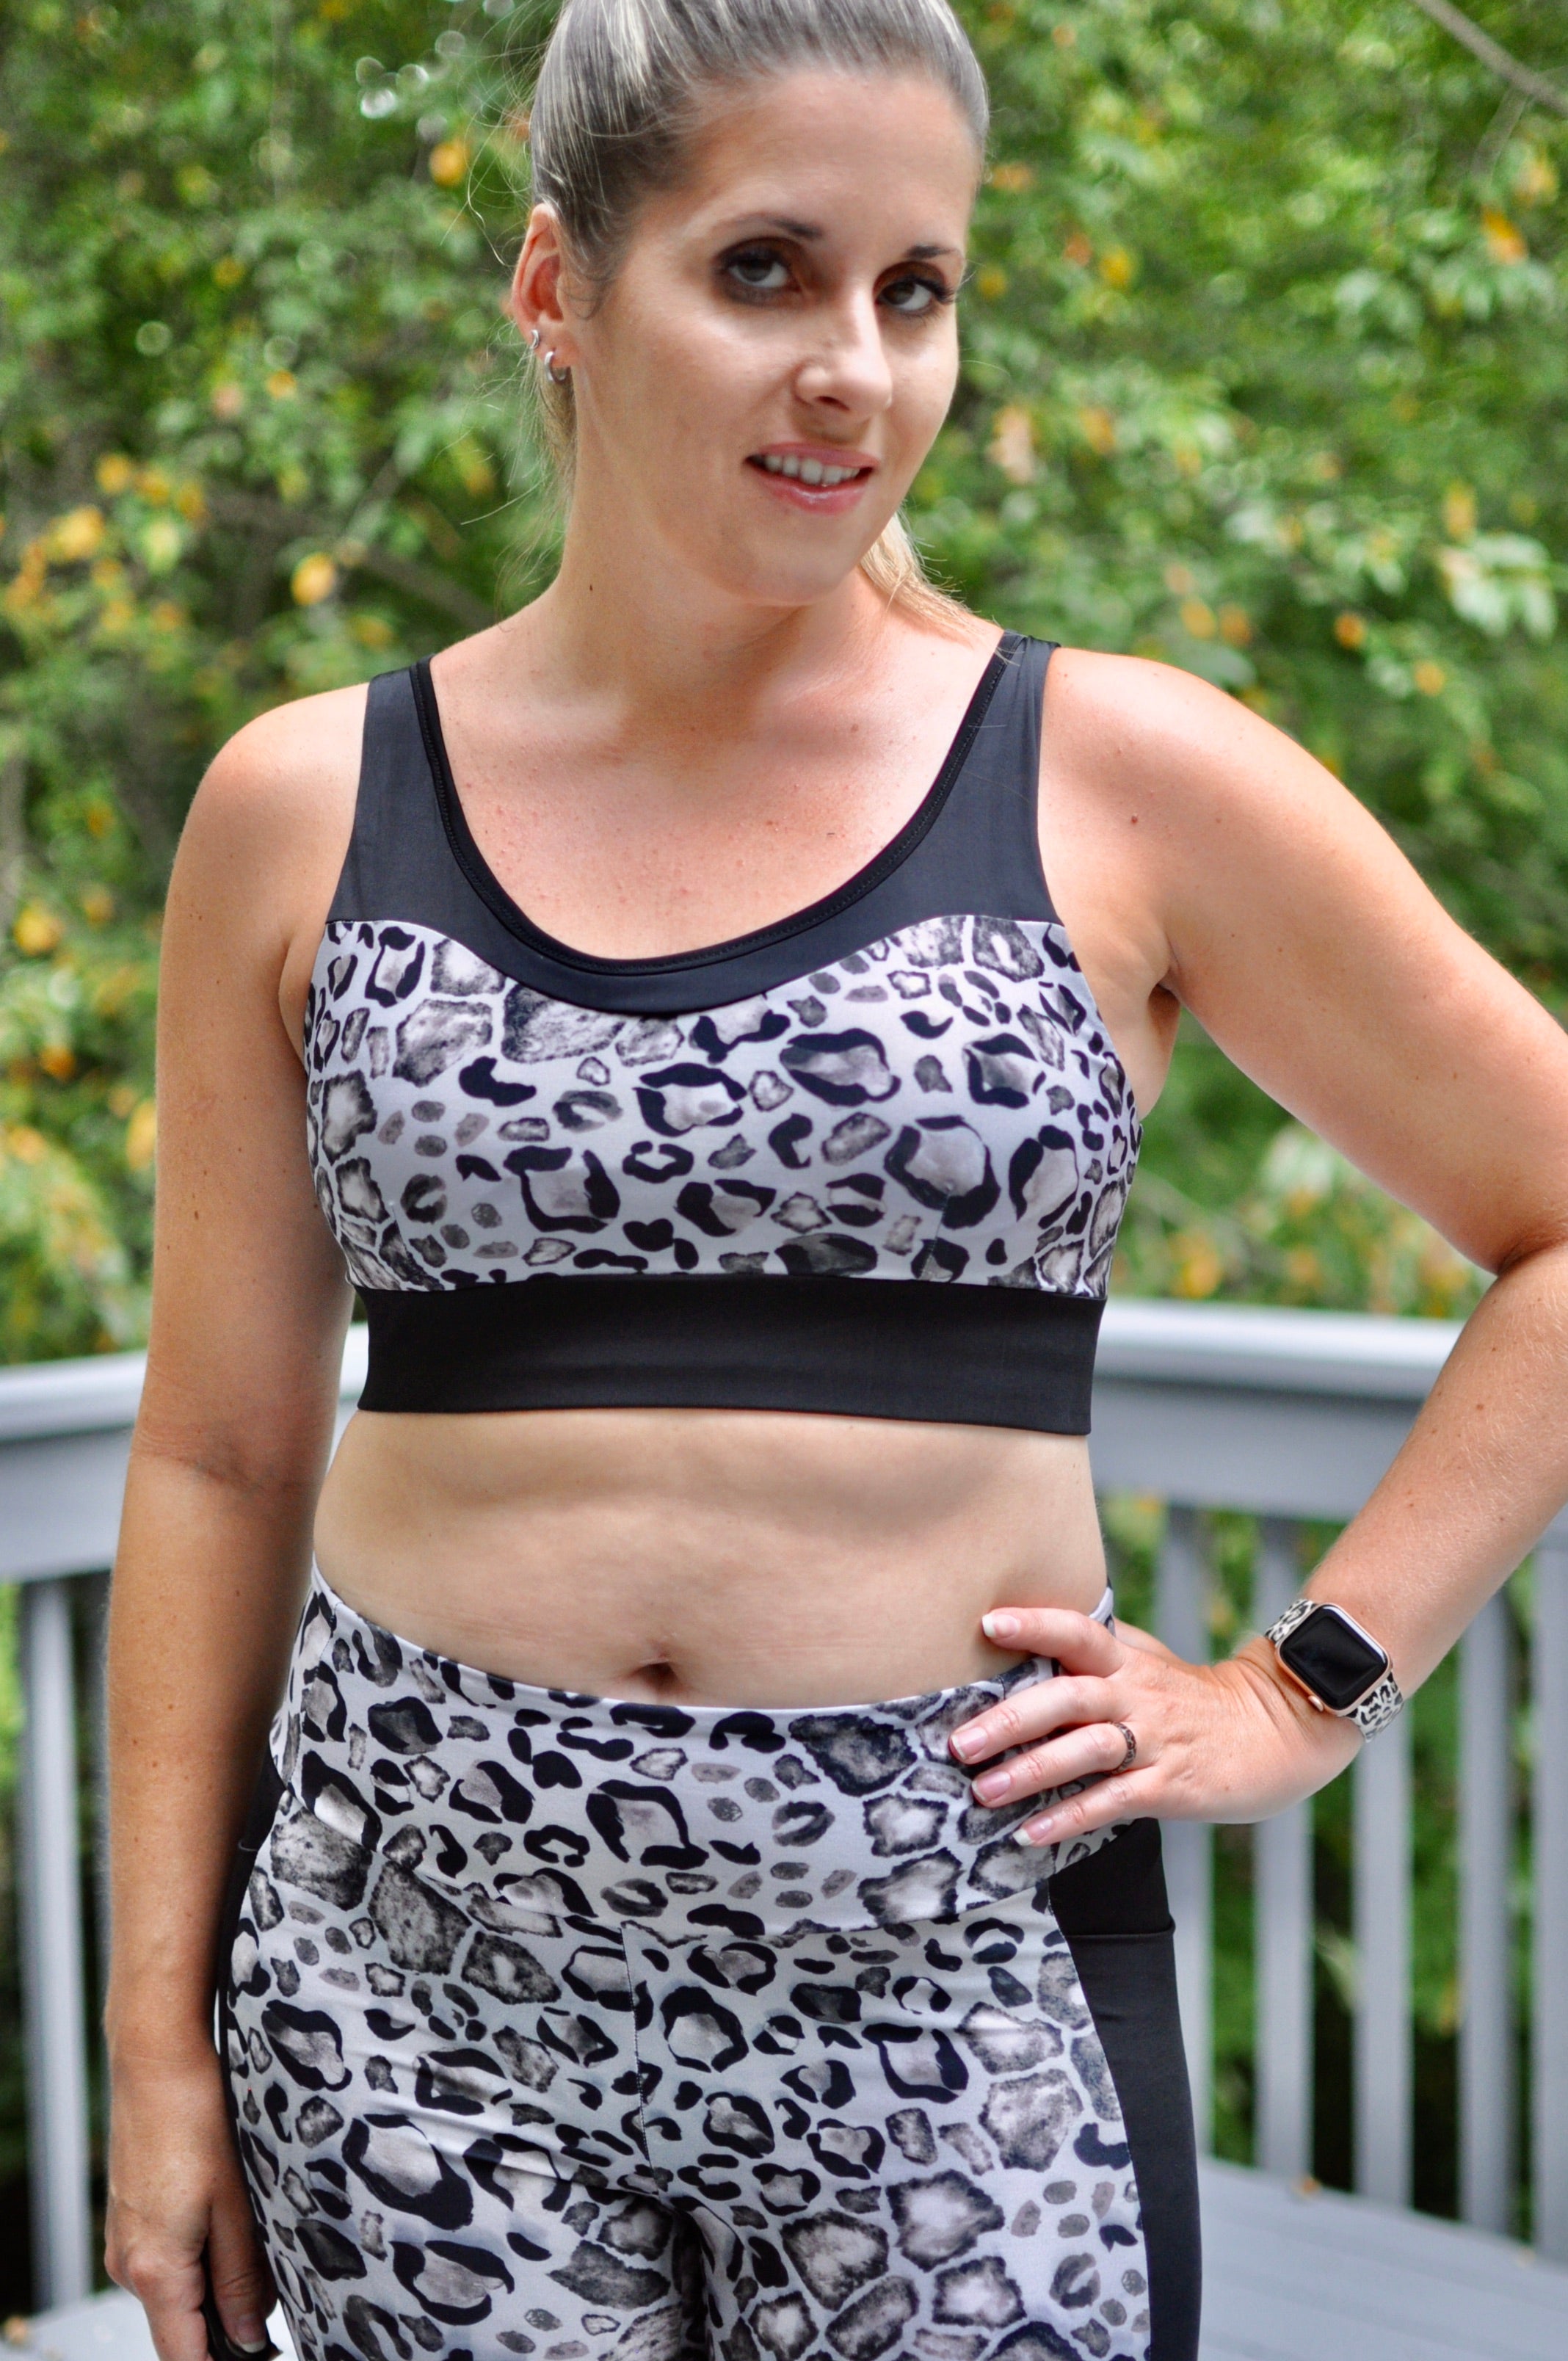 Greenstyle Endurance Bra in Bands 28 33 actual Ribcage Measurement and Cups  B H PDF Sewing Pattern 